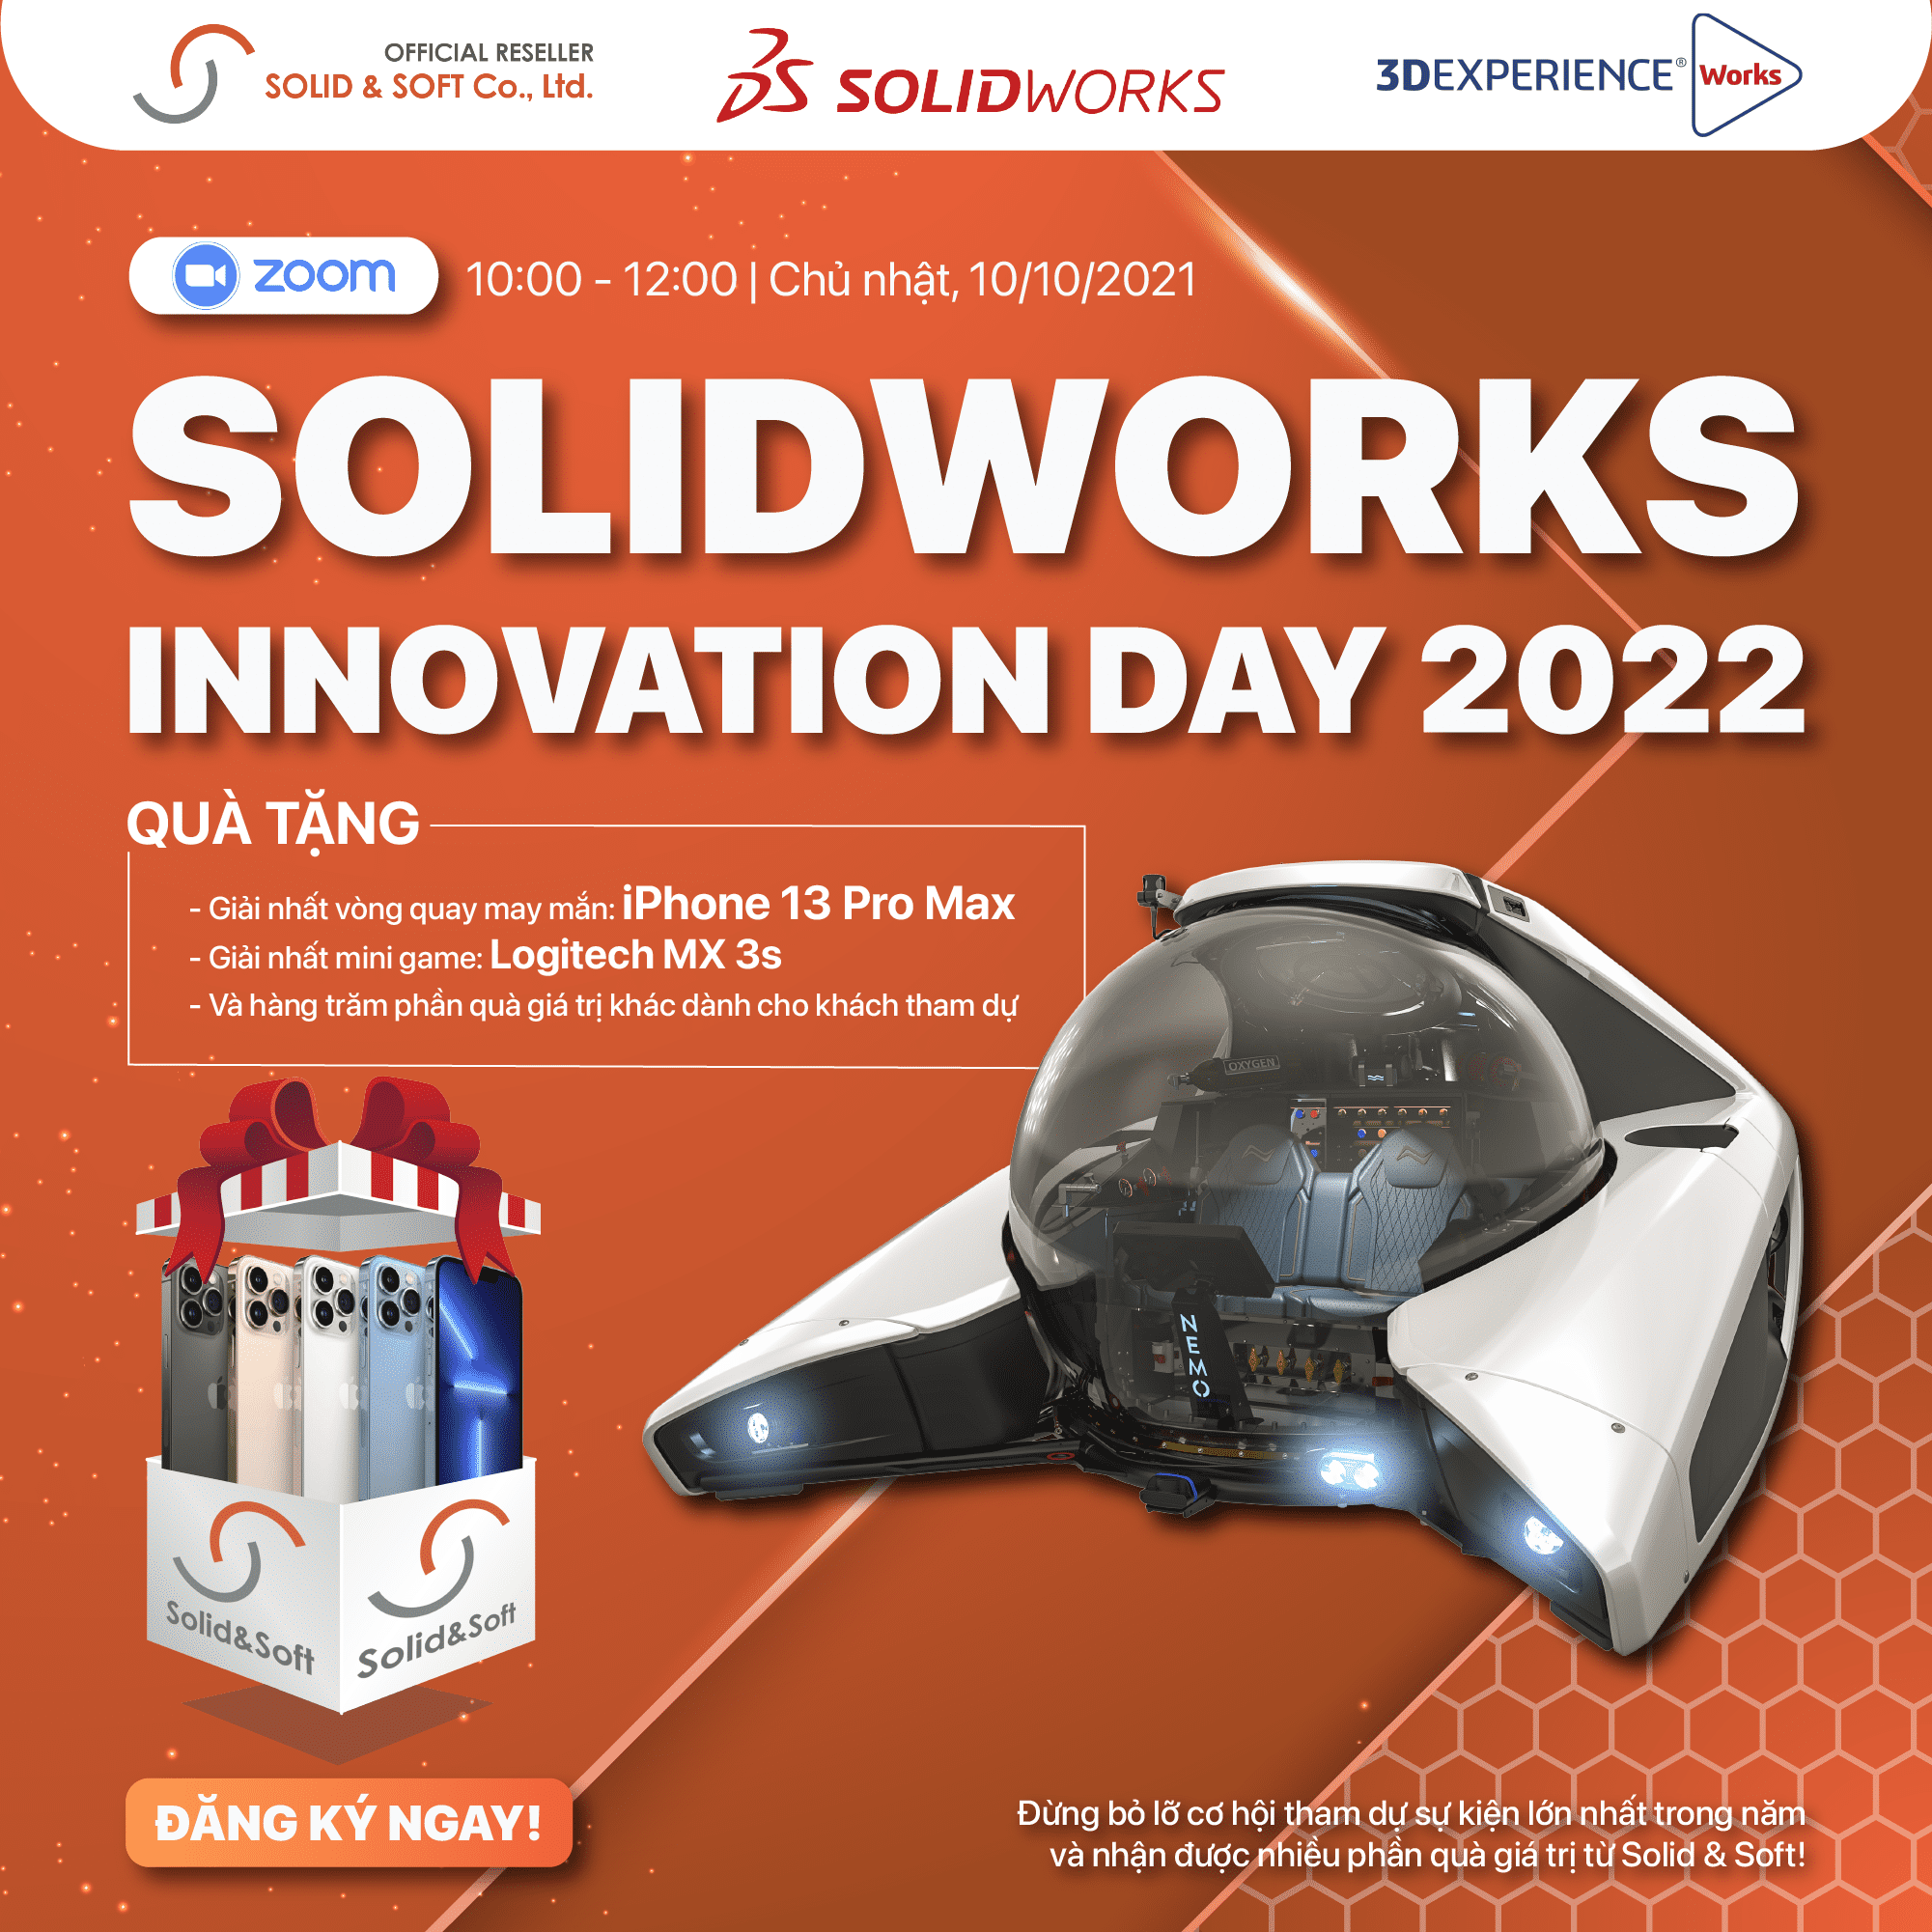 SOLIDWORKS Innovation Day 2022